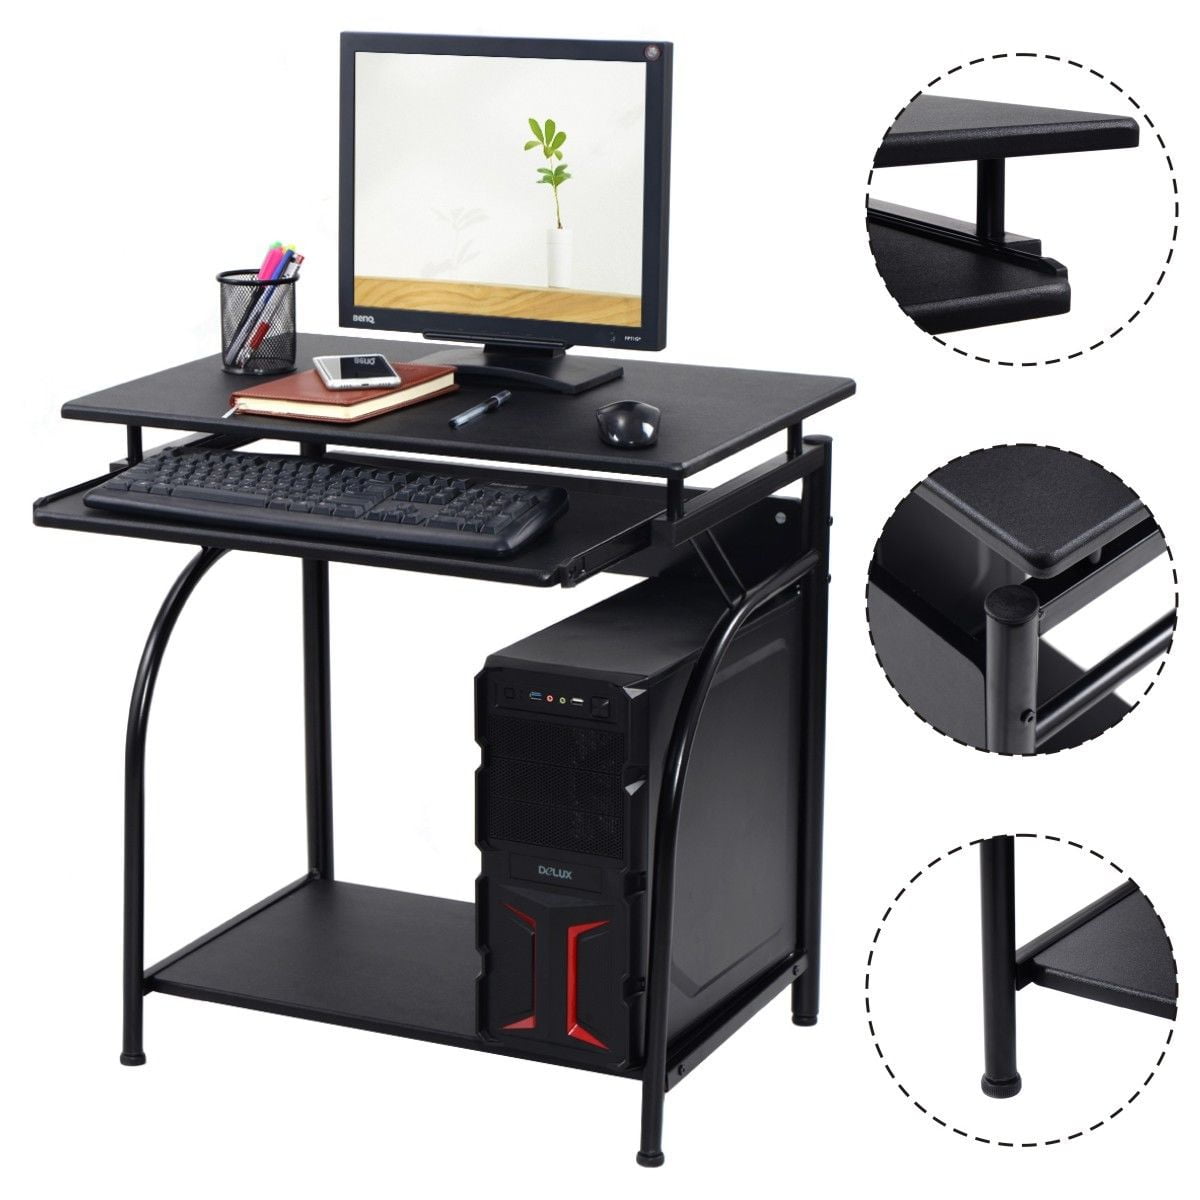 Details about   Computer Desk PC Laptop Table Study Writing Workstation Home Office Furniture US